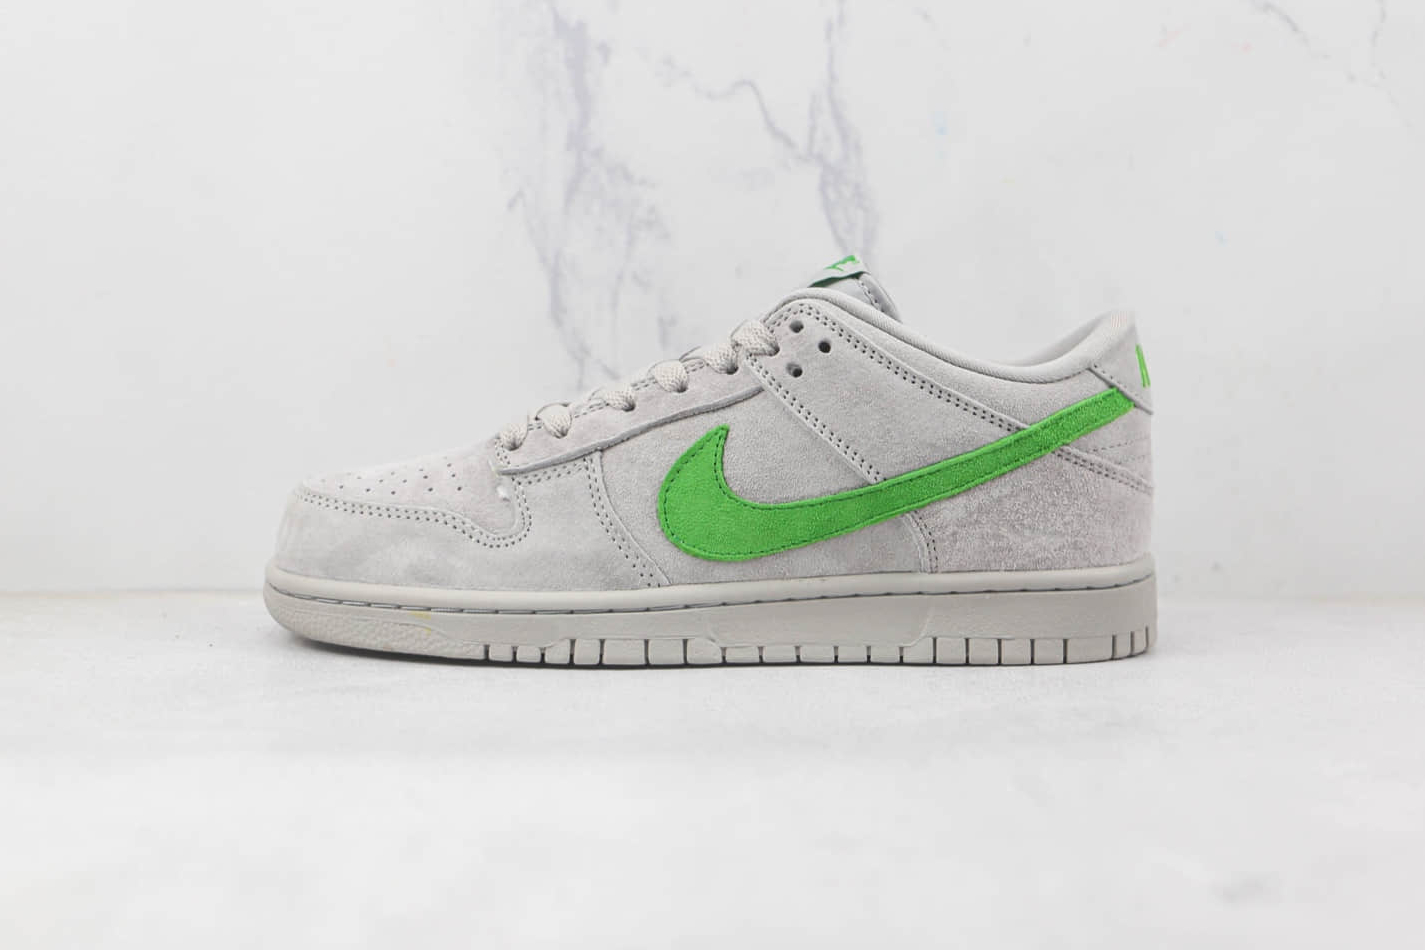 Nike SB Dunk Low Dark Grey Wolf Grey Green Shoes 316272-526 - Stylish and Durable Footwear for Skateboarding and Streetwear